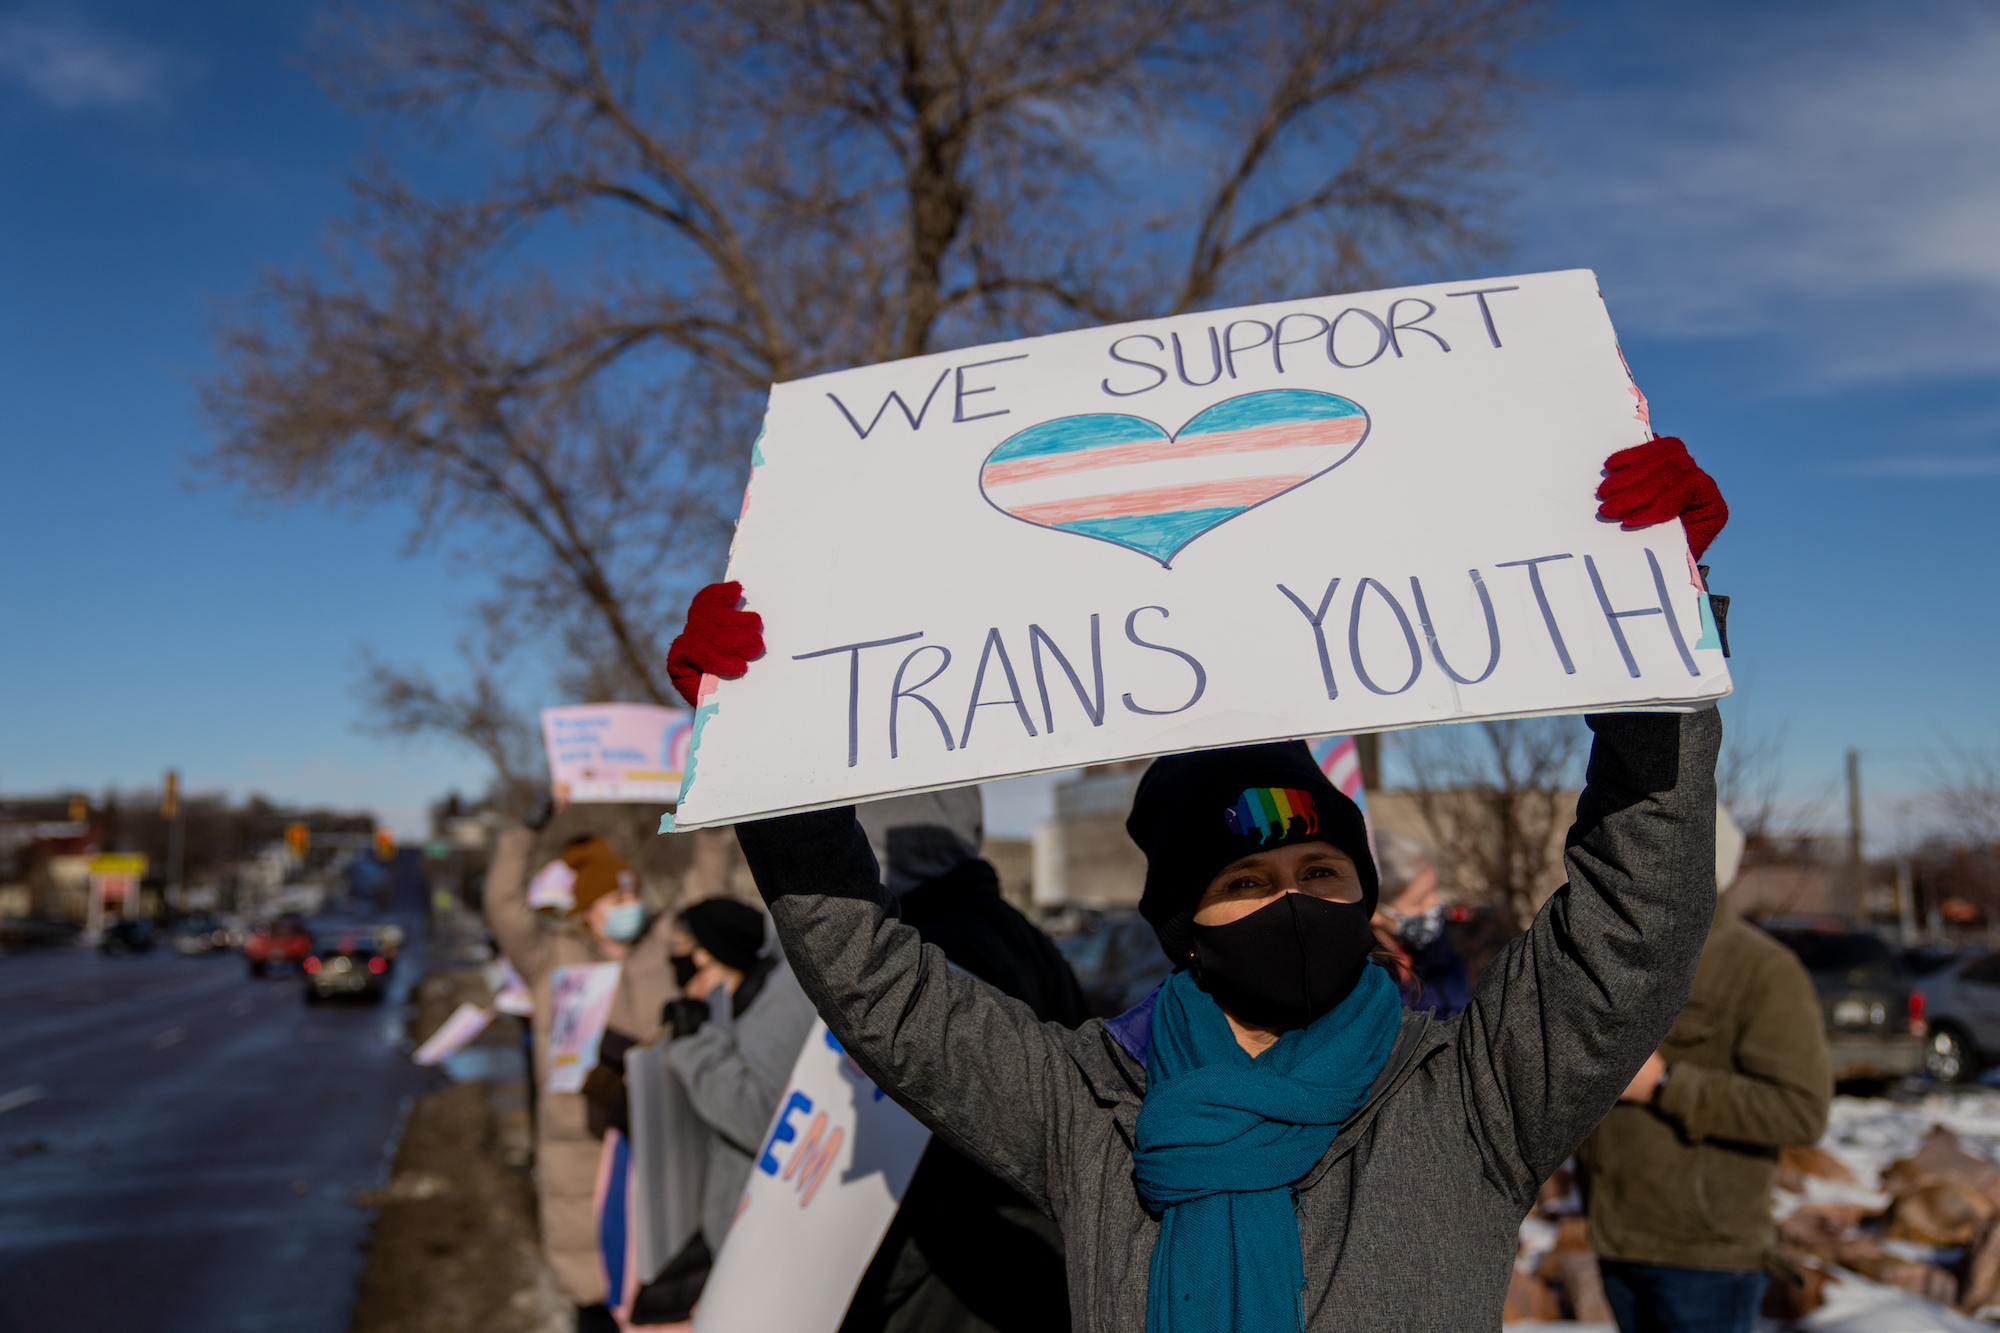 A person holding a sign reading "We Support Trans Youth."